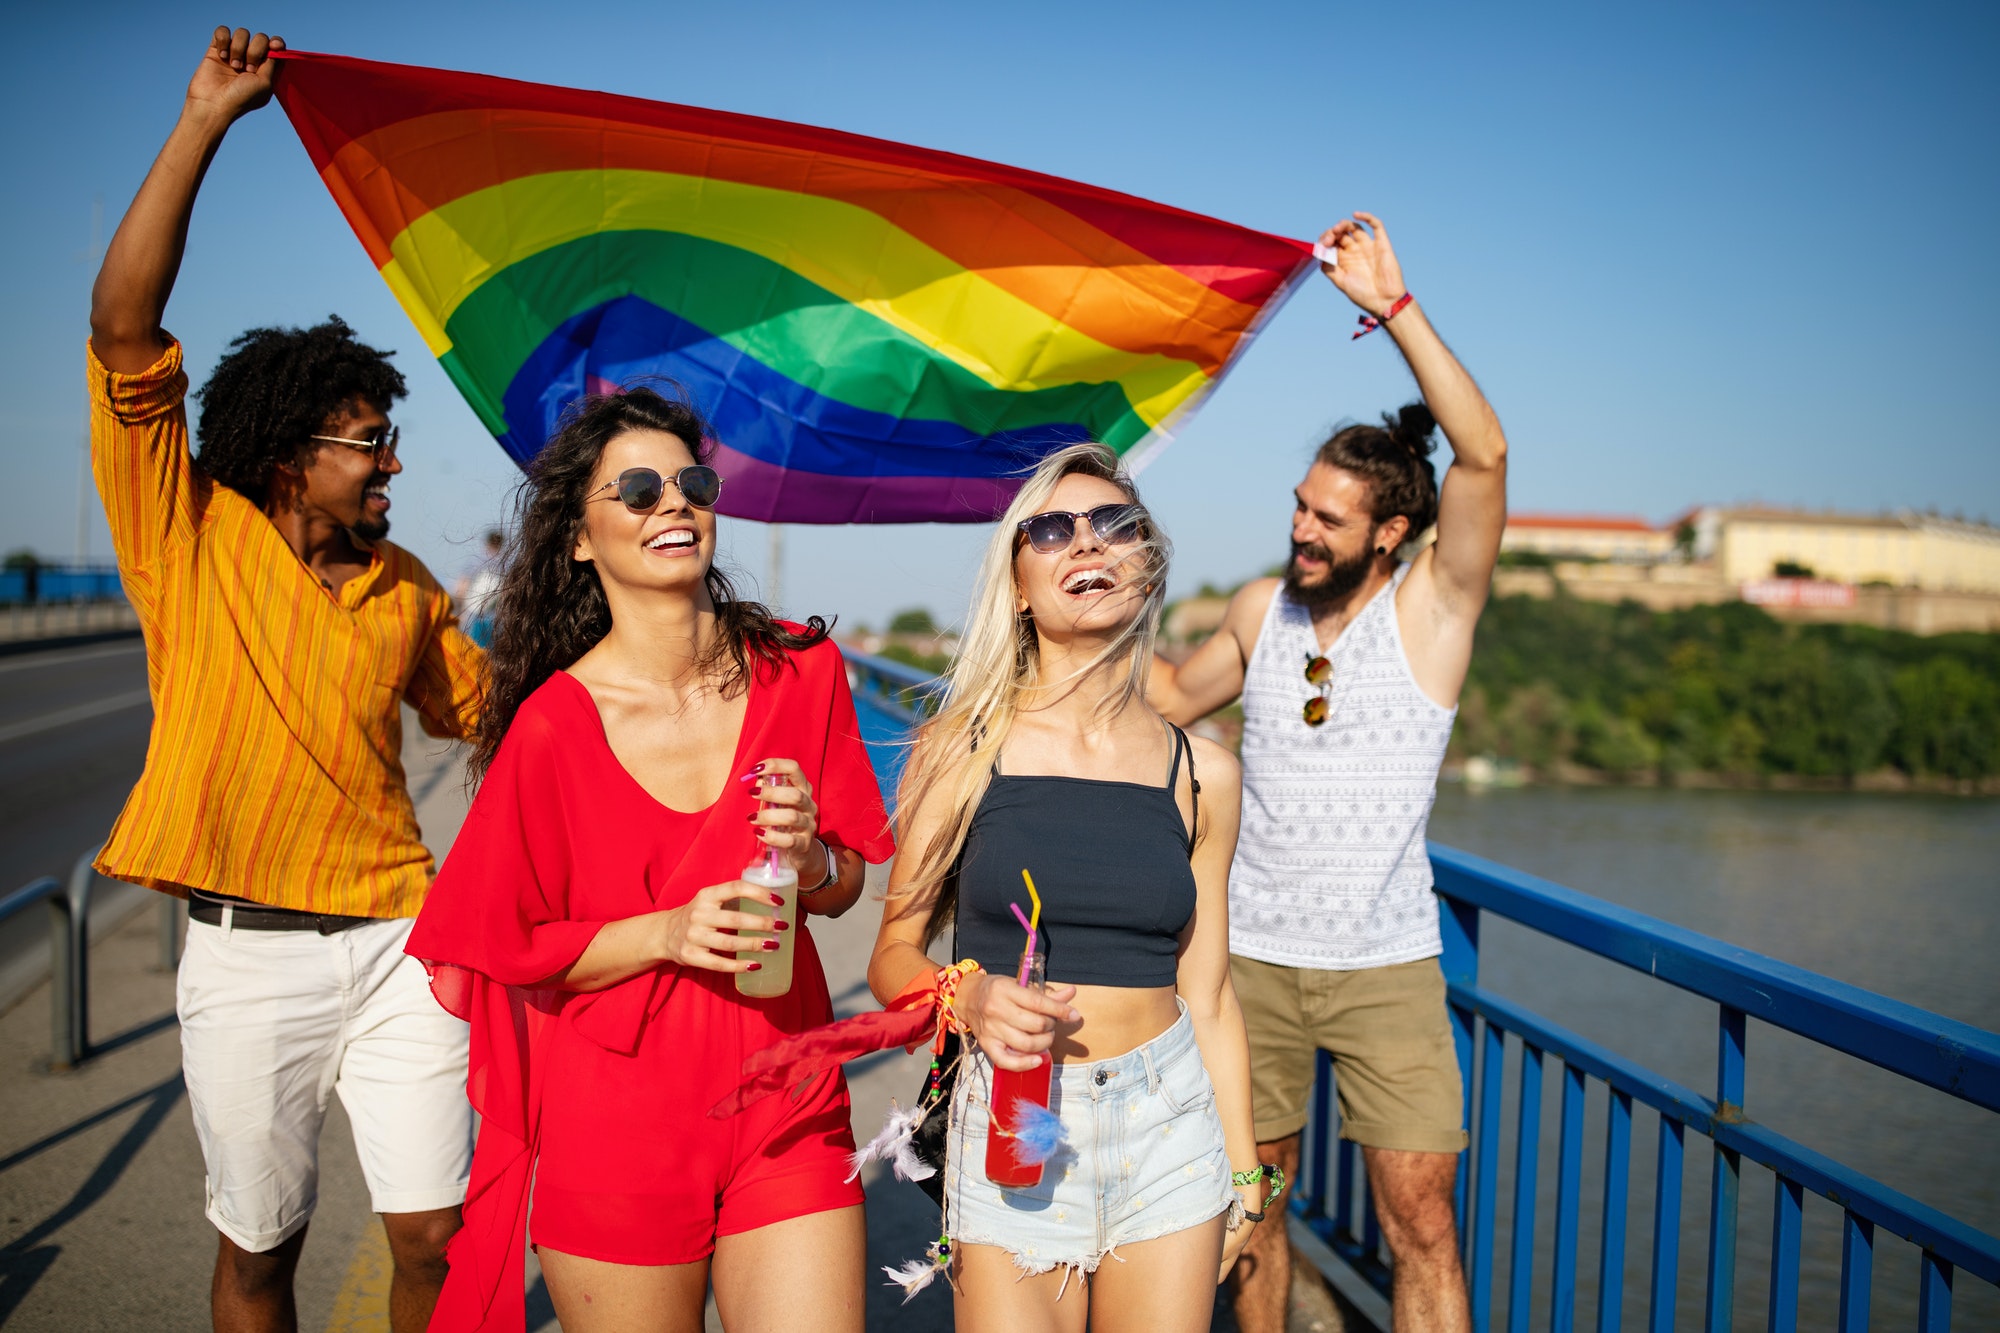 Group of friends, people attend a gay pride event